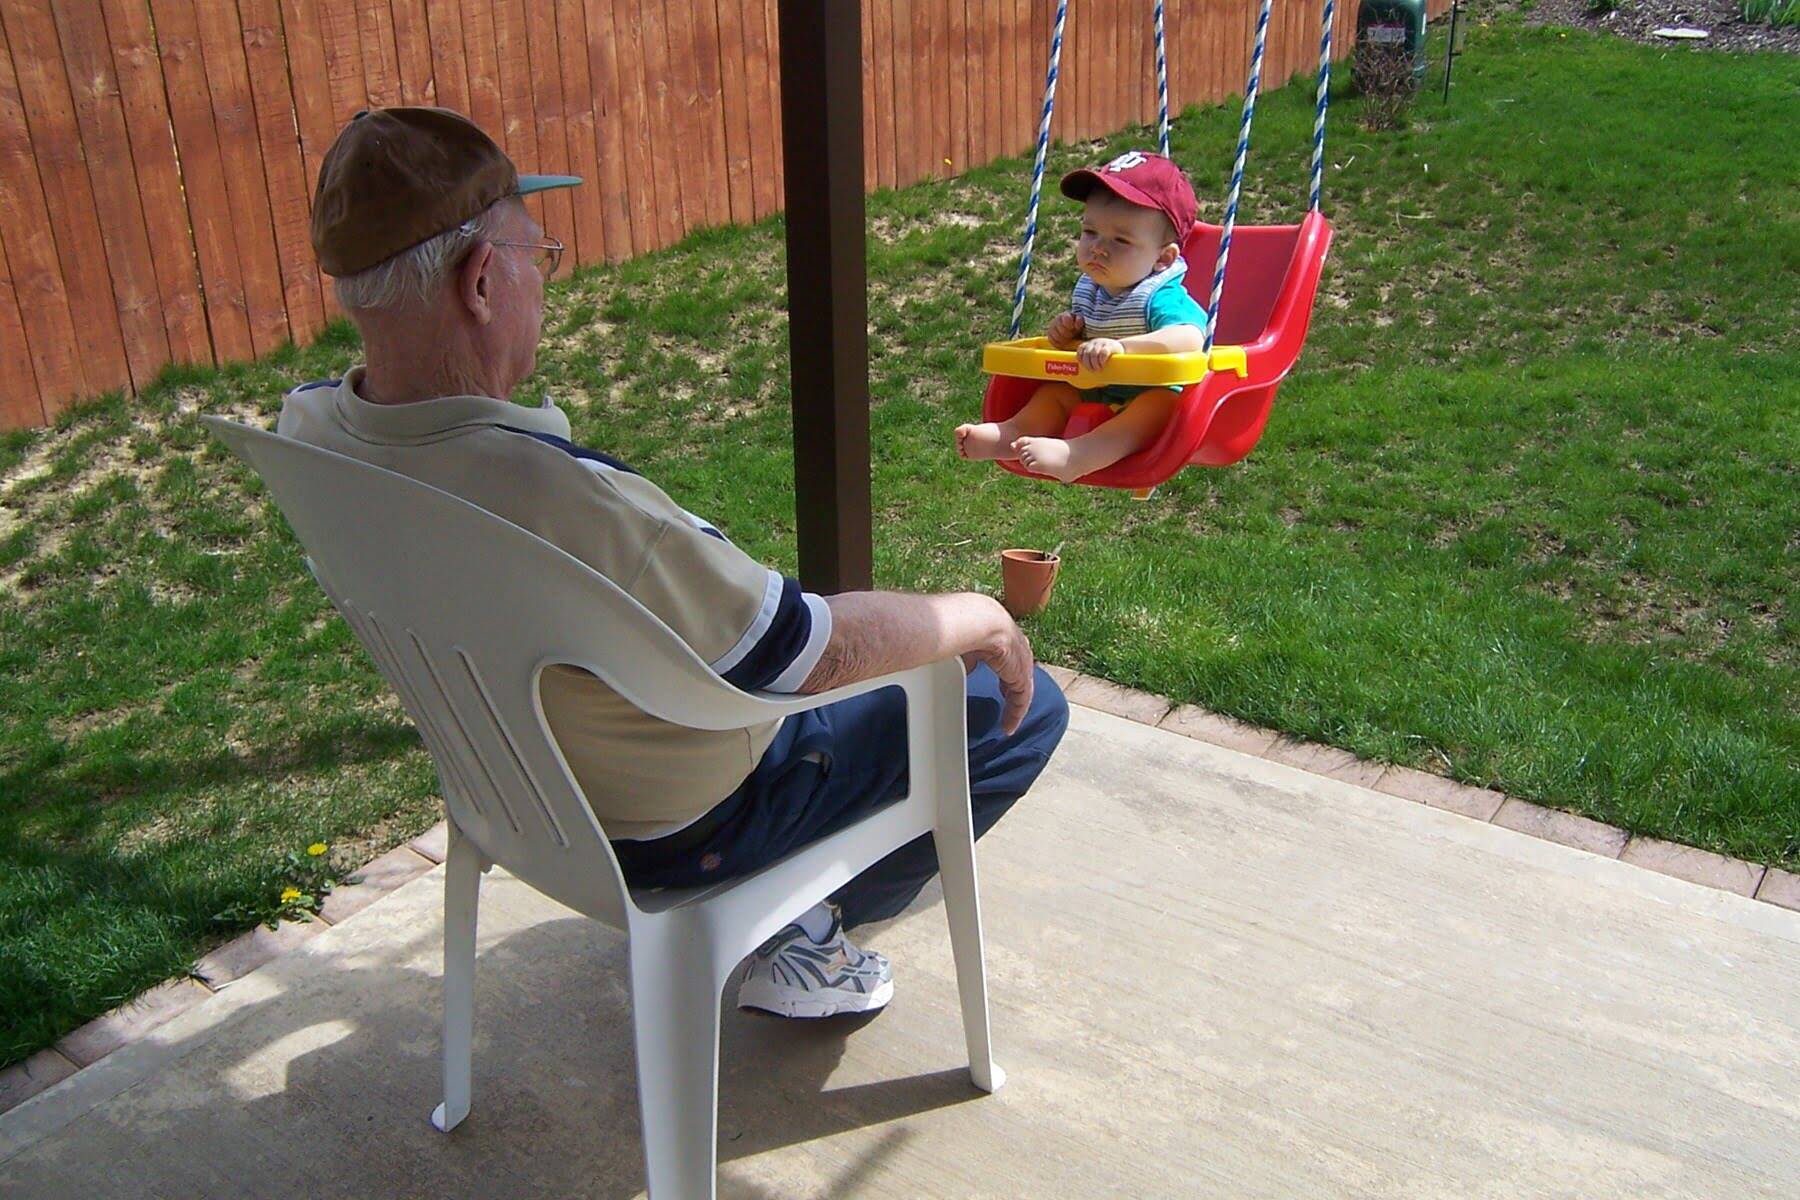 How To Hang Little Tikes Swing From Porch